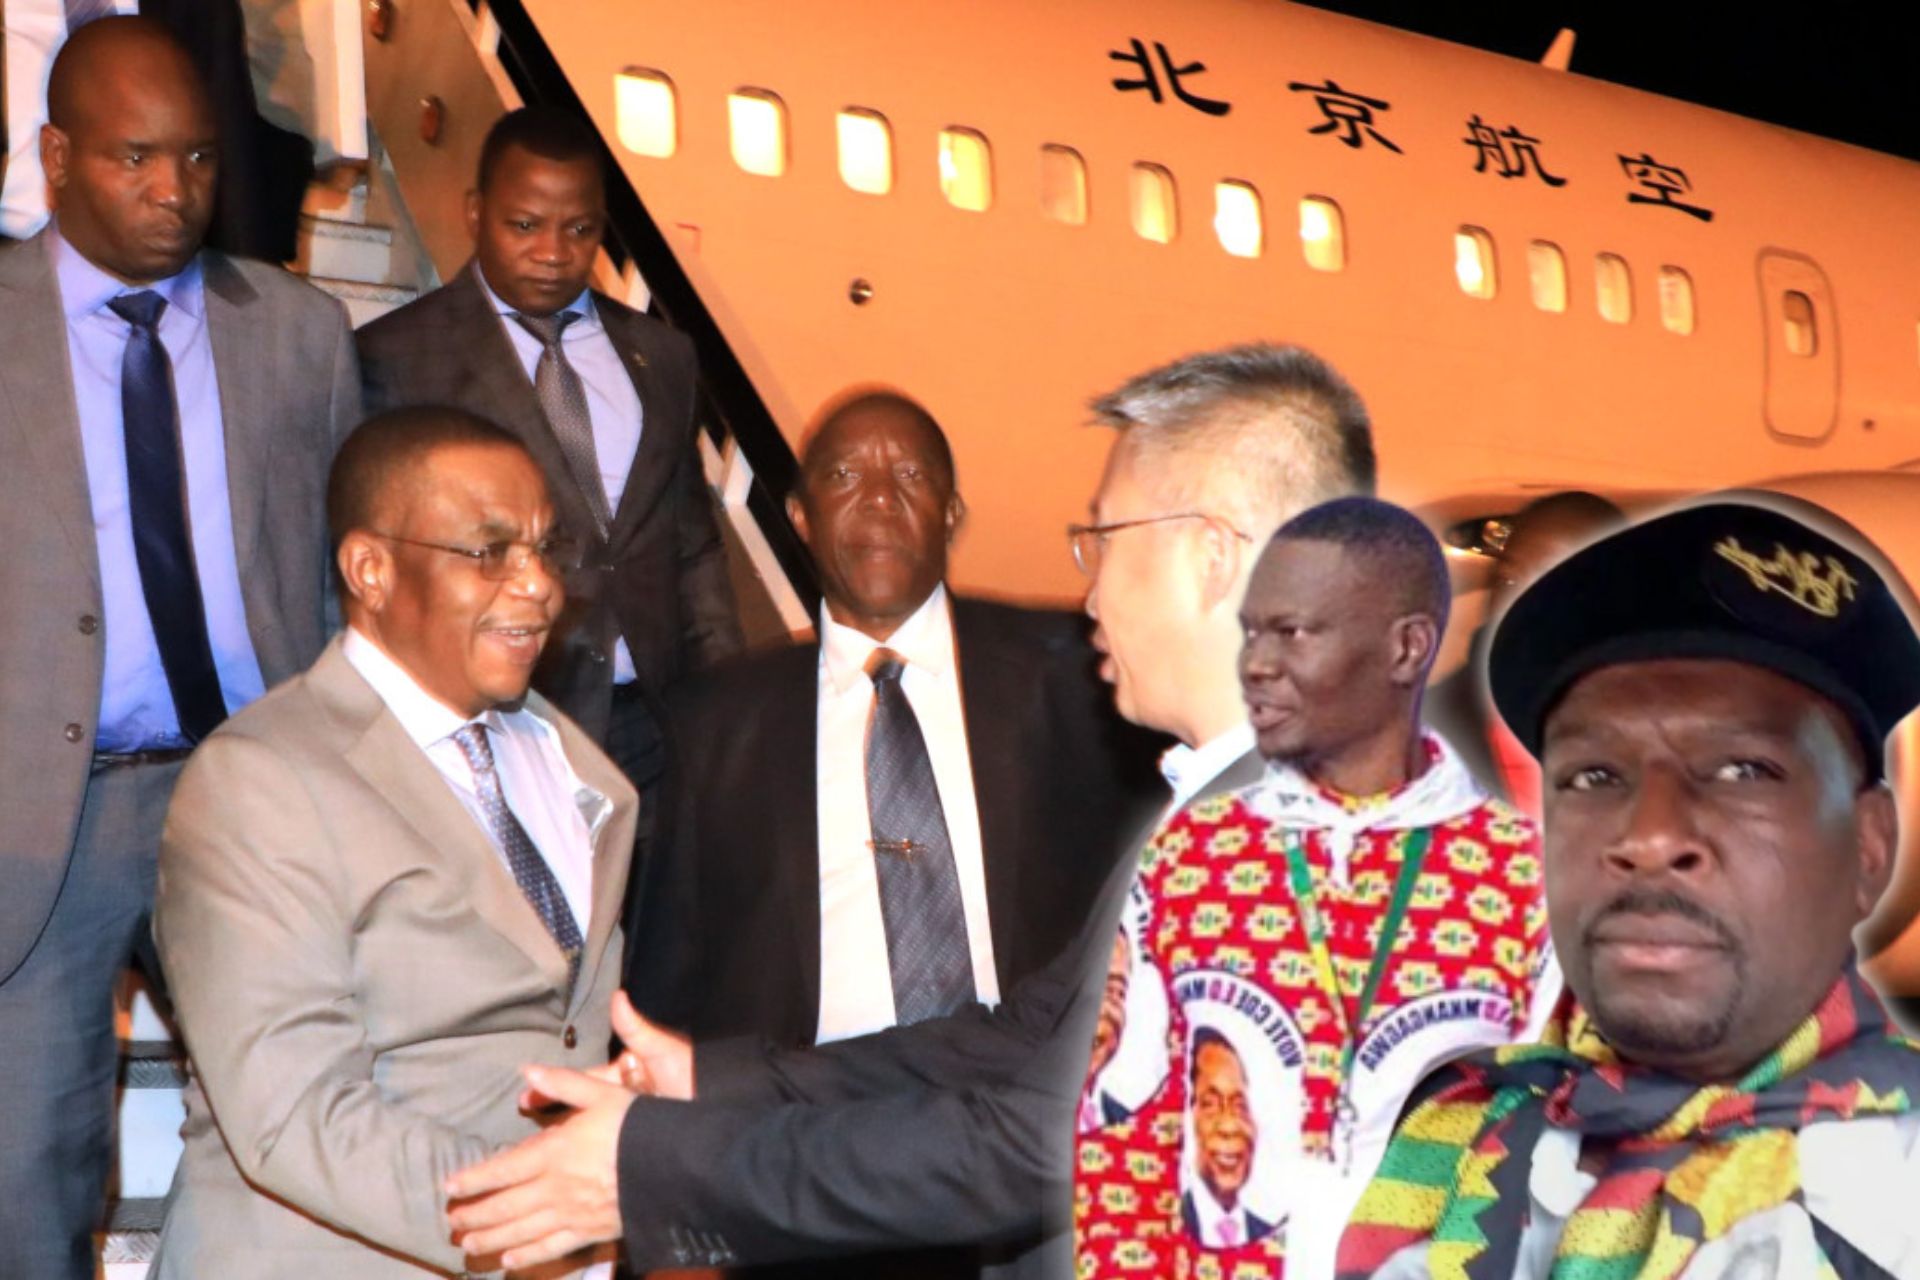 Allegedly: Mike Chimombe and Moses Mpofu Arrested Upon Arrival in Zimbabwe